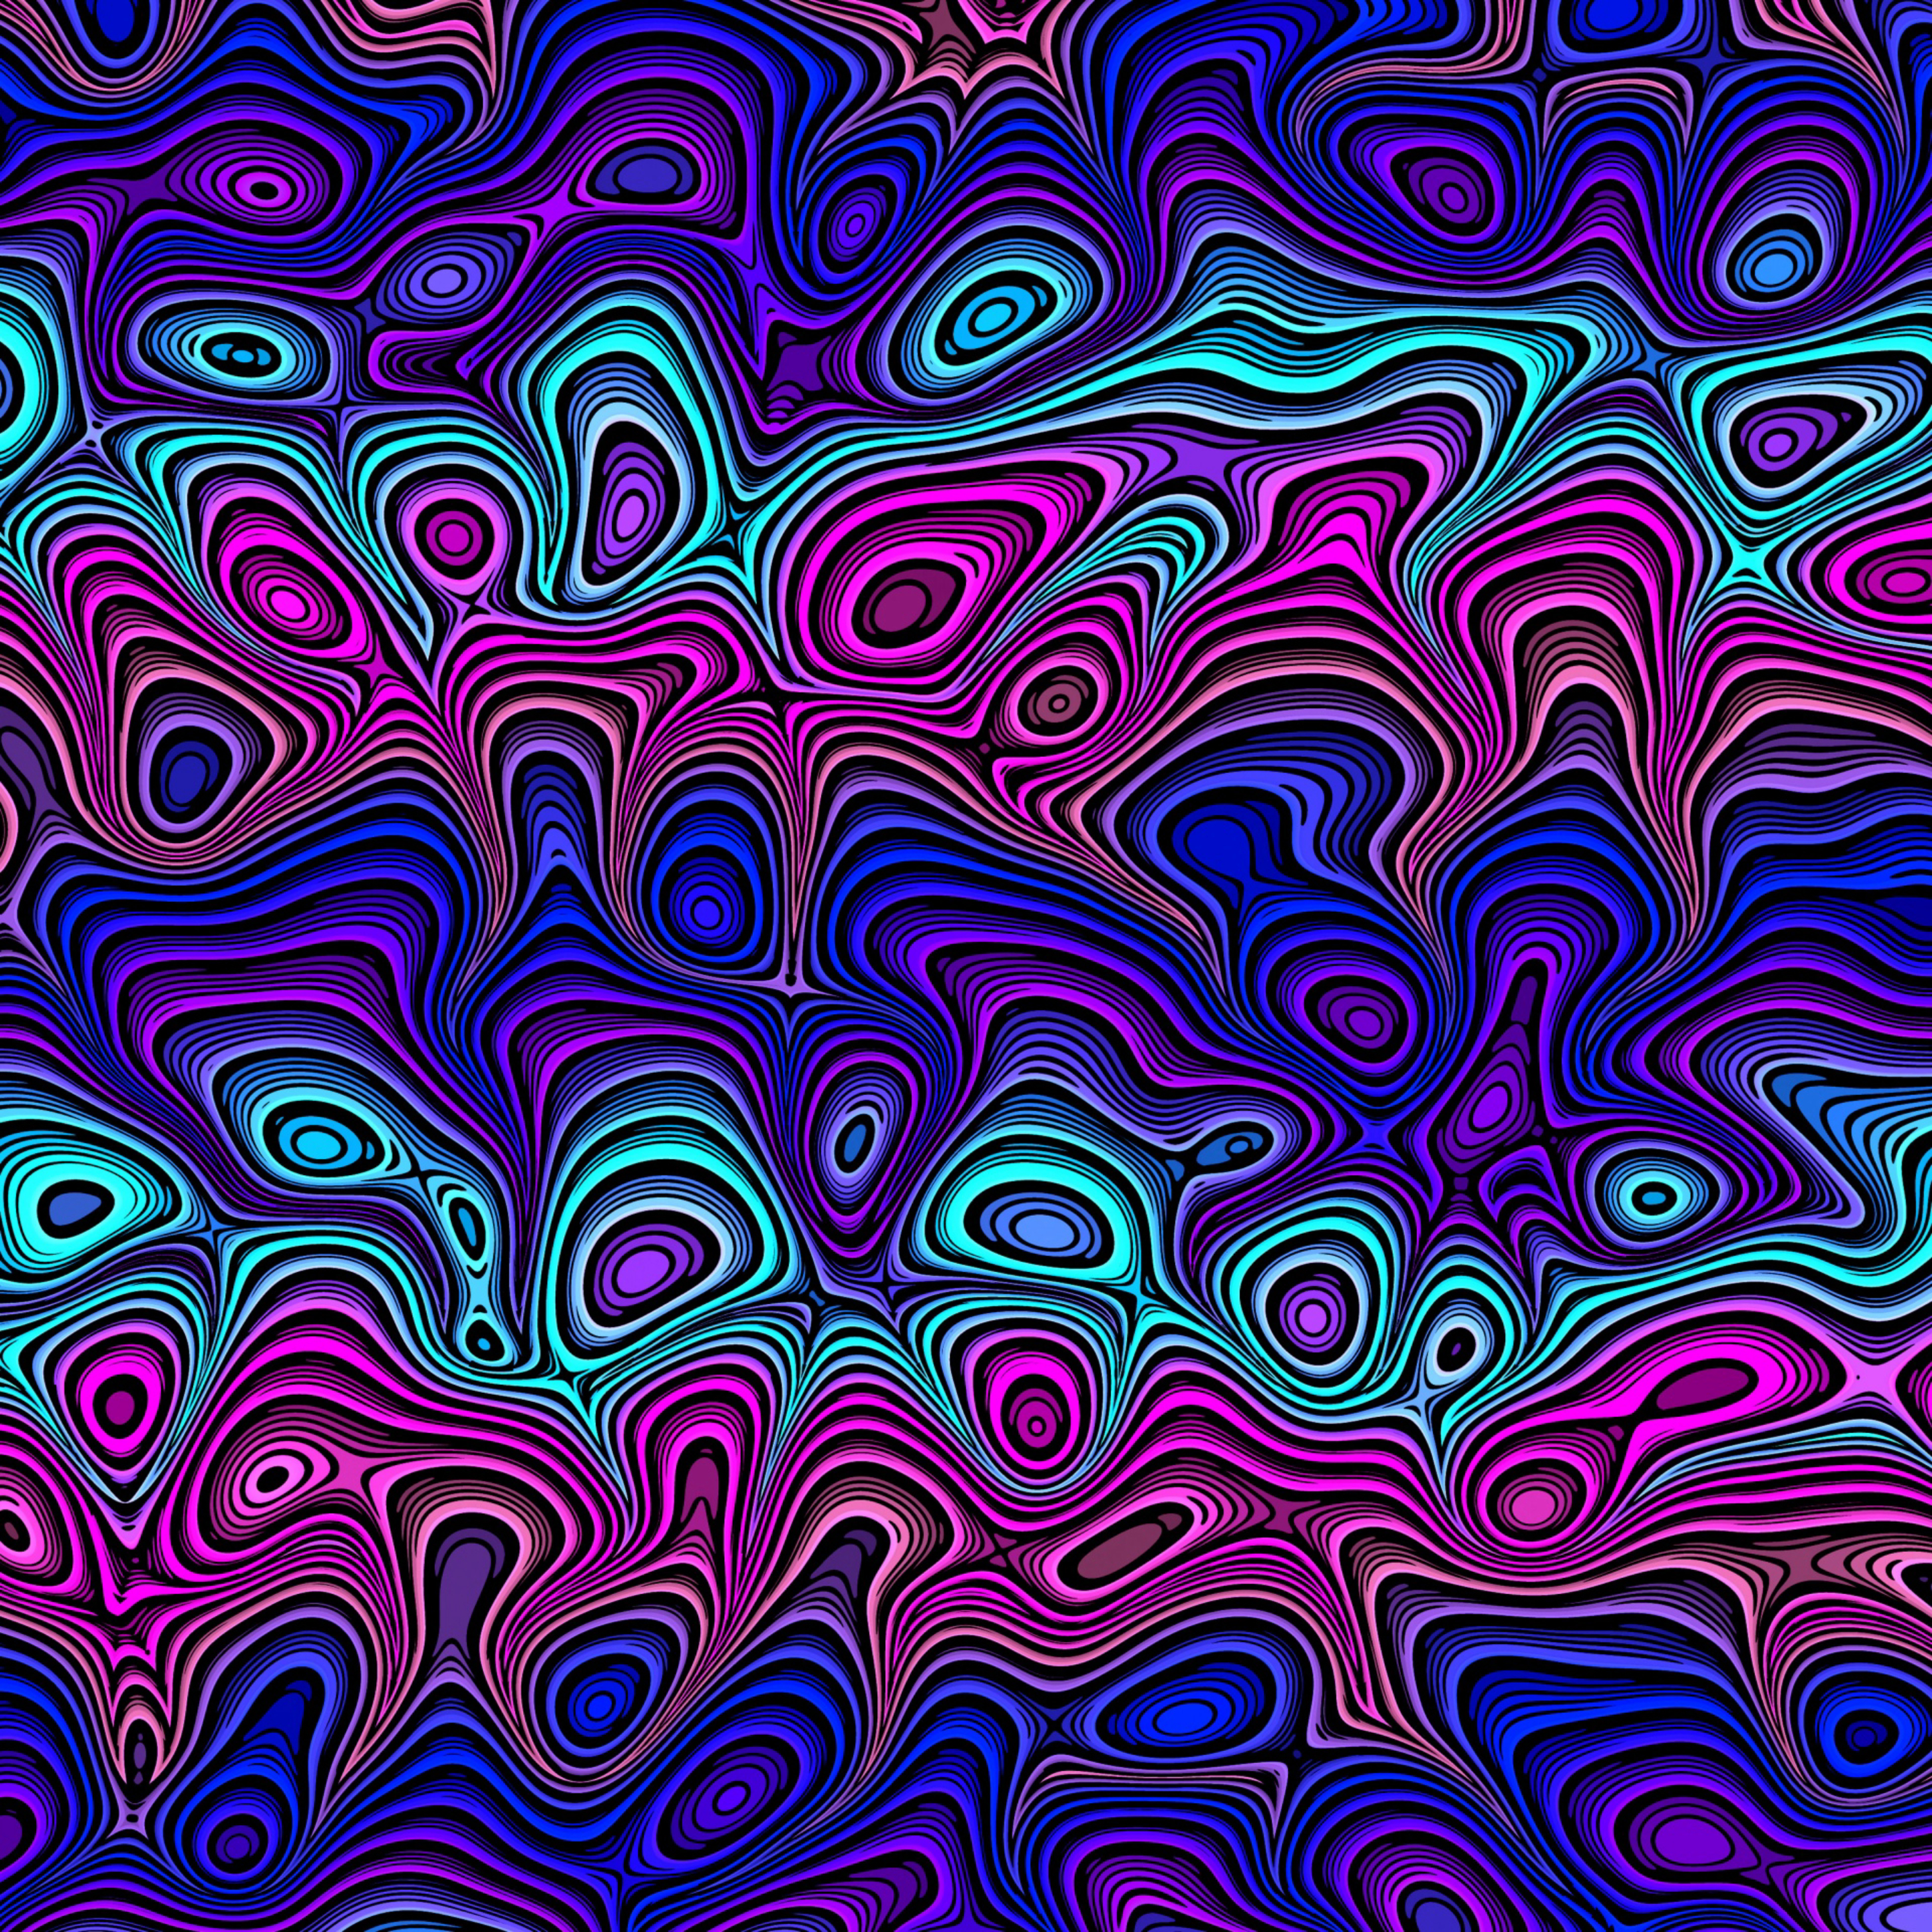 motley, abstract, multicolored, lines, wavy, swirling, involute for android